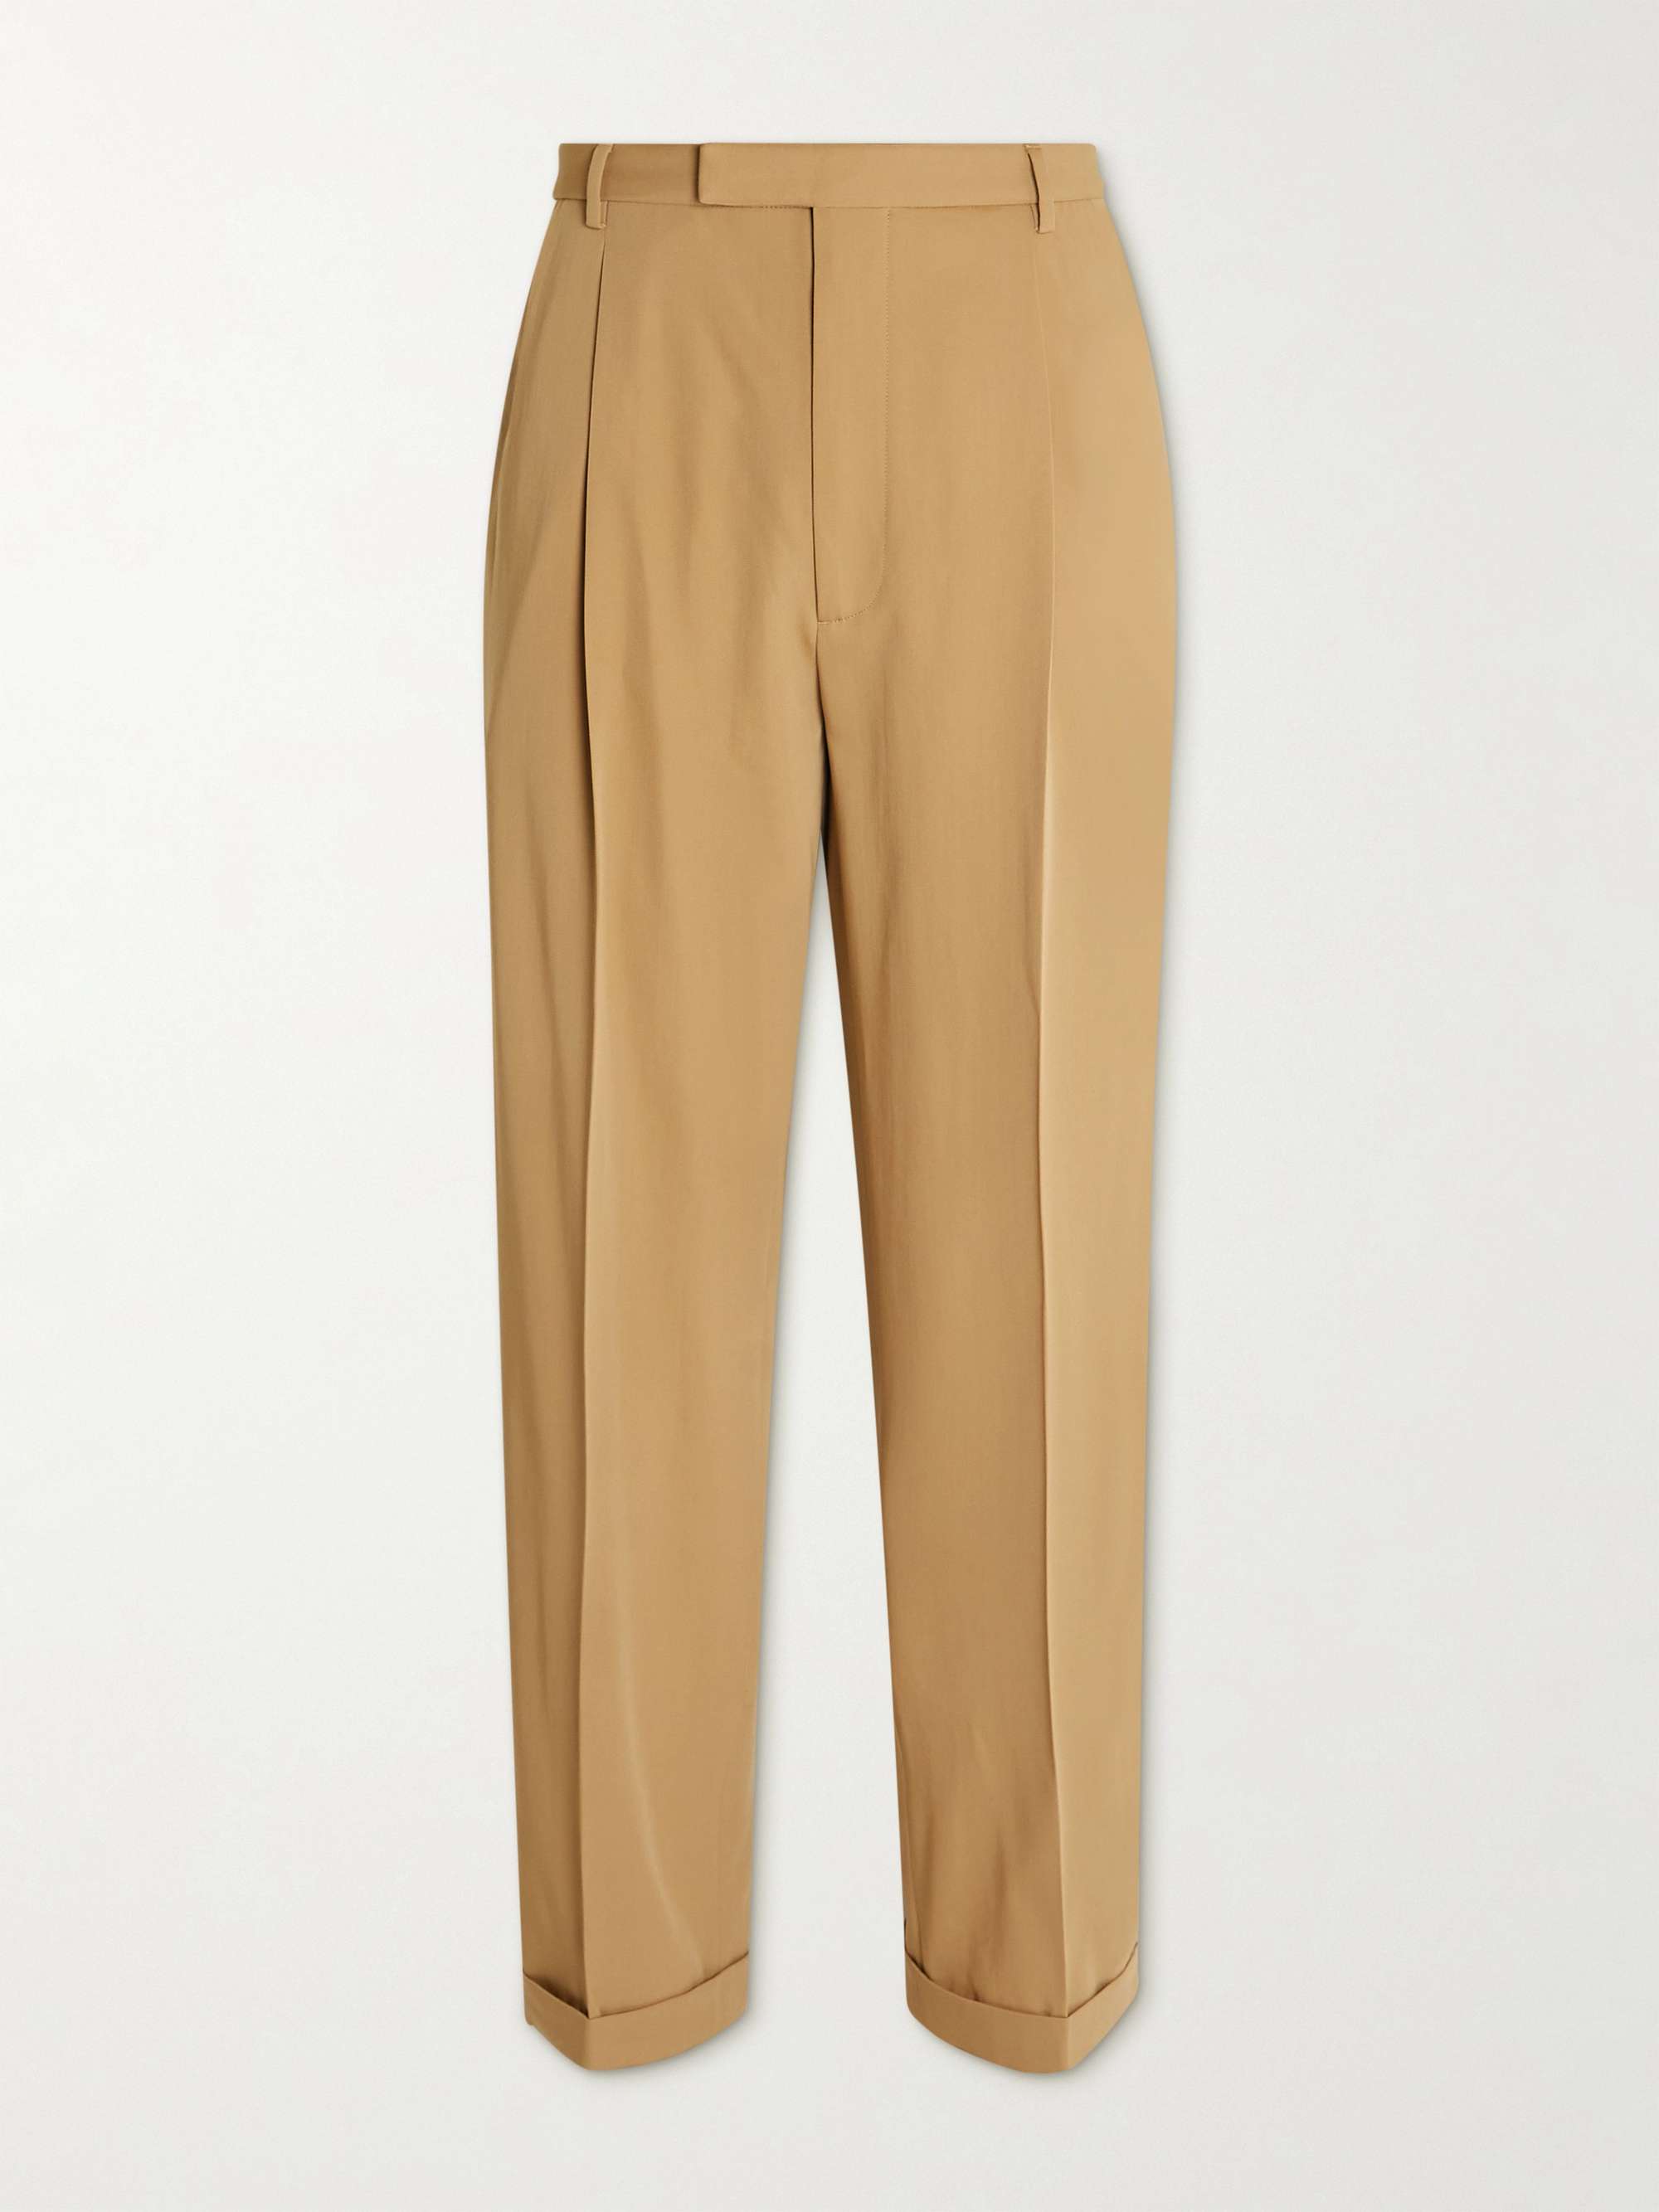 Thomas Burberry 7\/8 Length Trousers white casual look Fashion Trousers 7/8 Length Trousers 